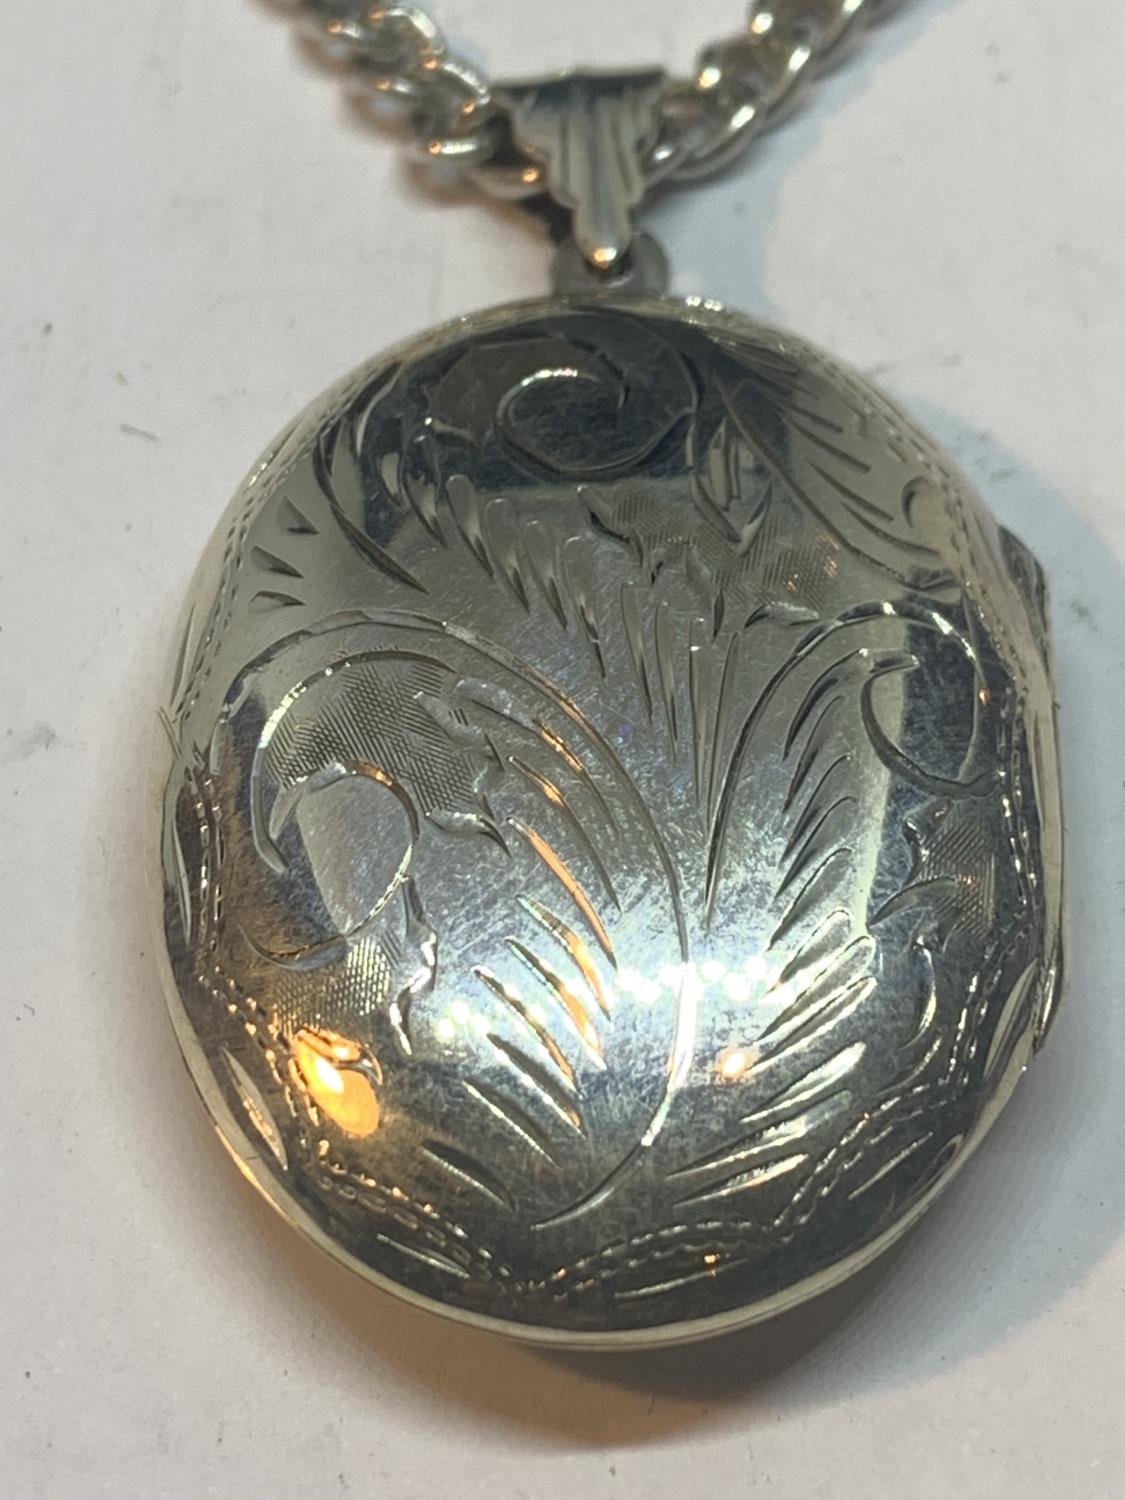 A SILVER NECKLACE WITH A LARGE OVAL LOCKET PENDANT - Image 2 of 4